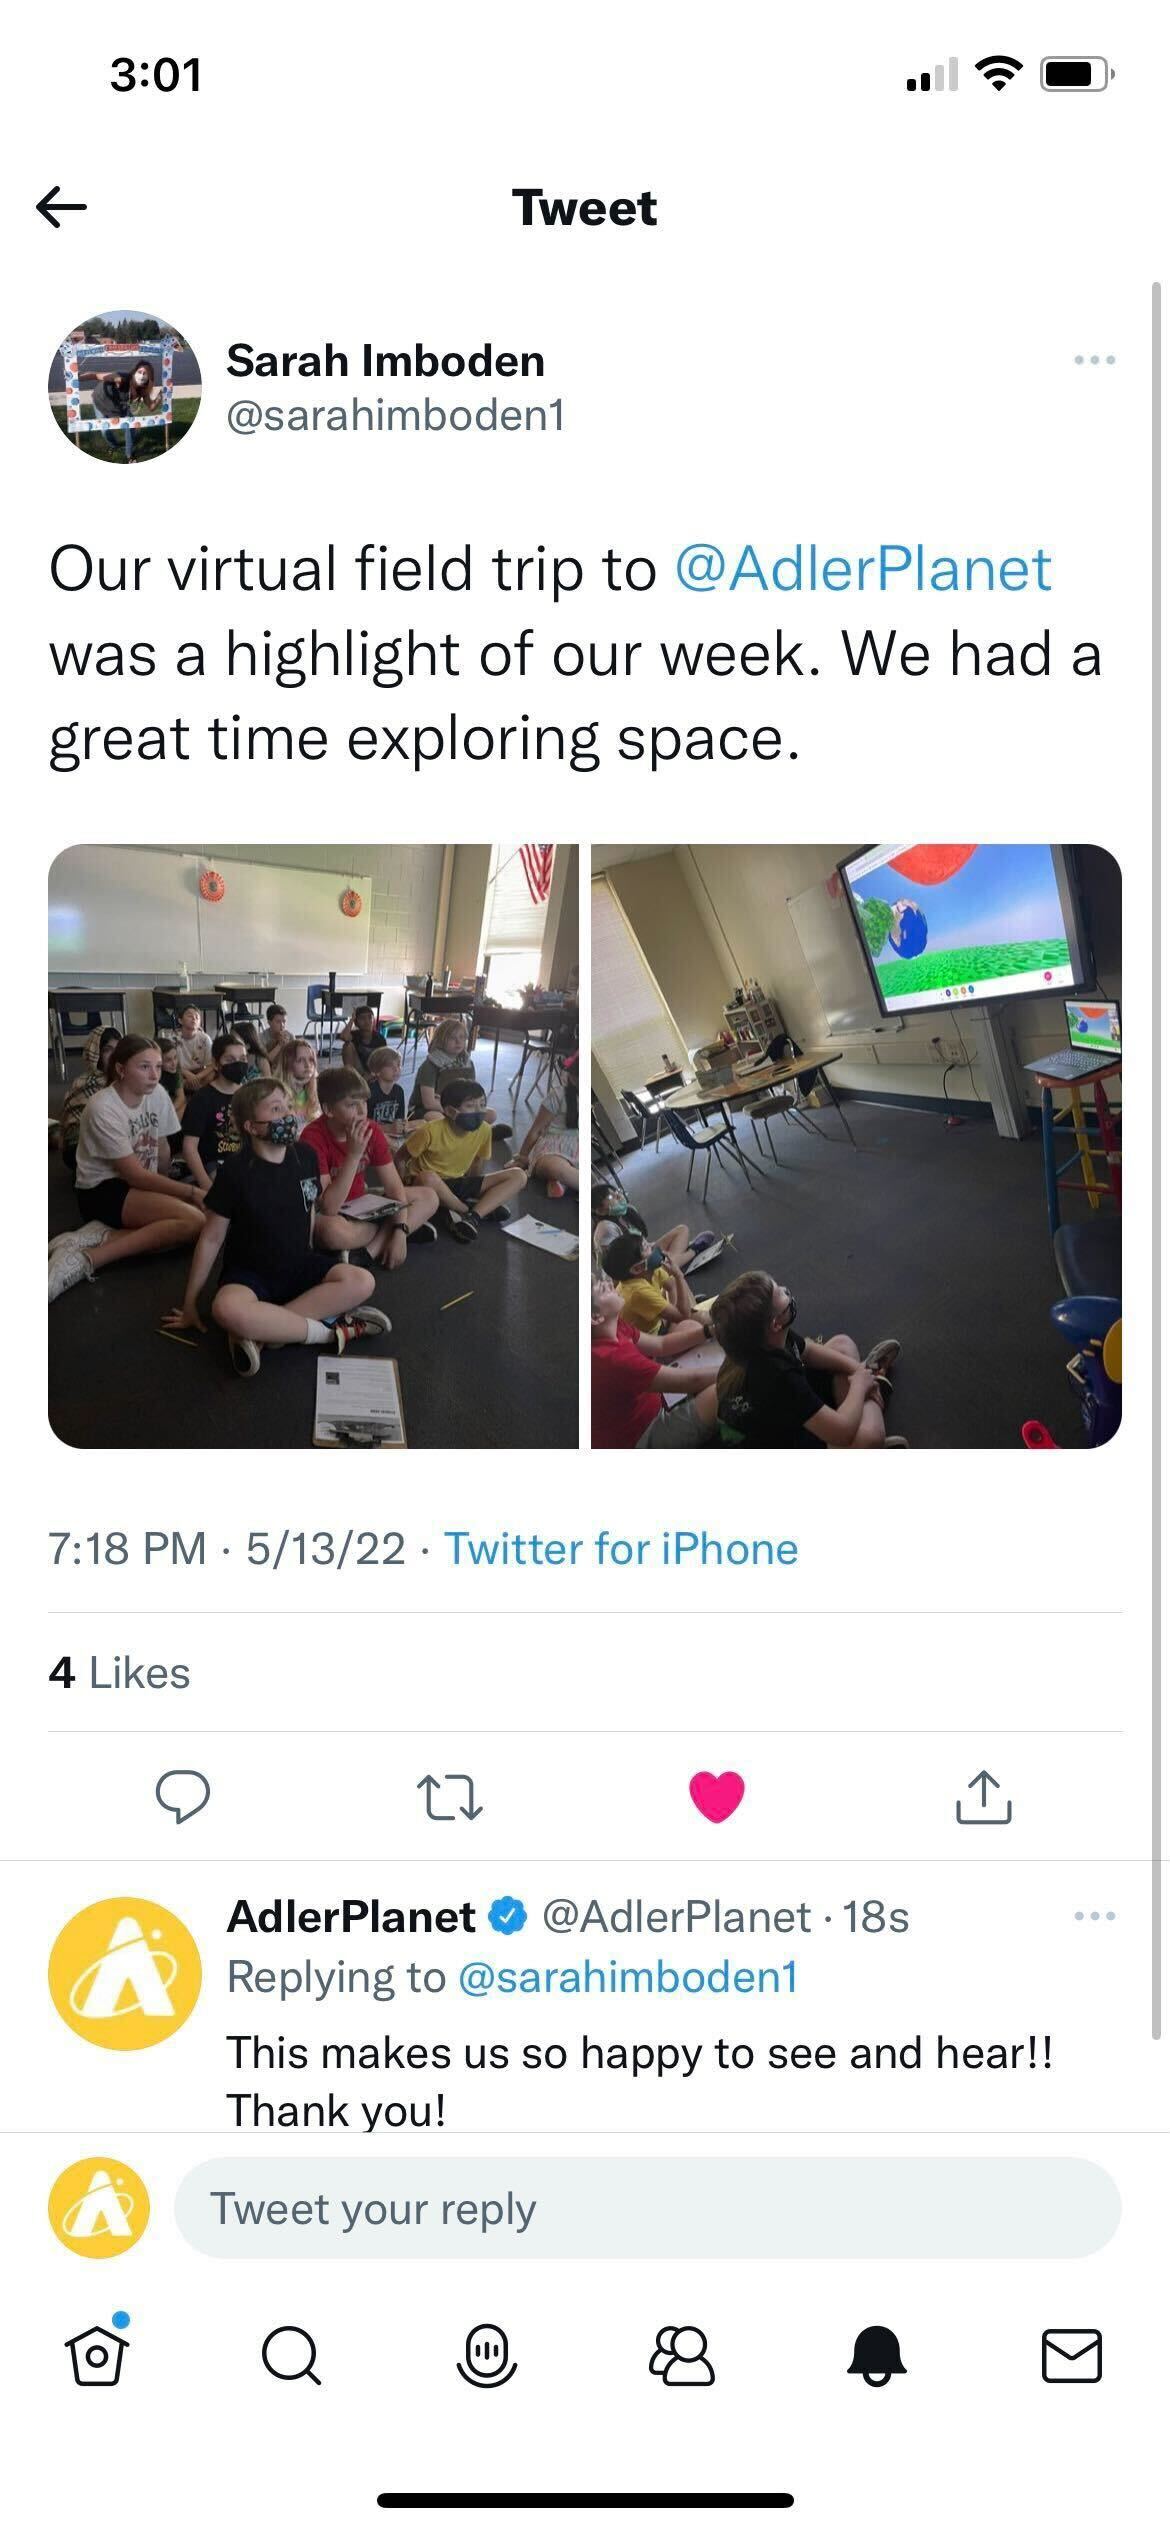 Tweet from a teacher who recently took their class on a virtual field trip video call. Images of her classroom and students taking the virtual field trip